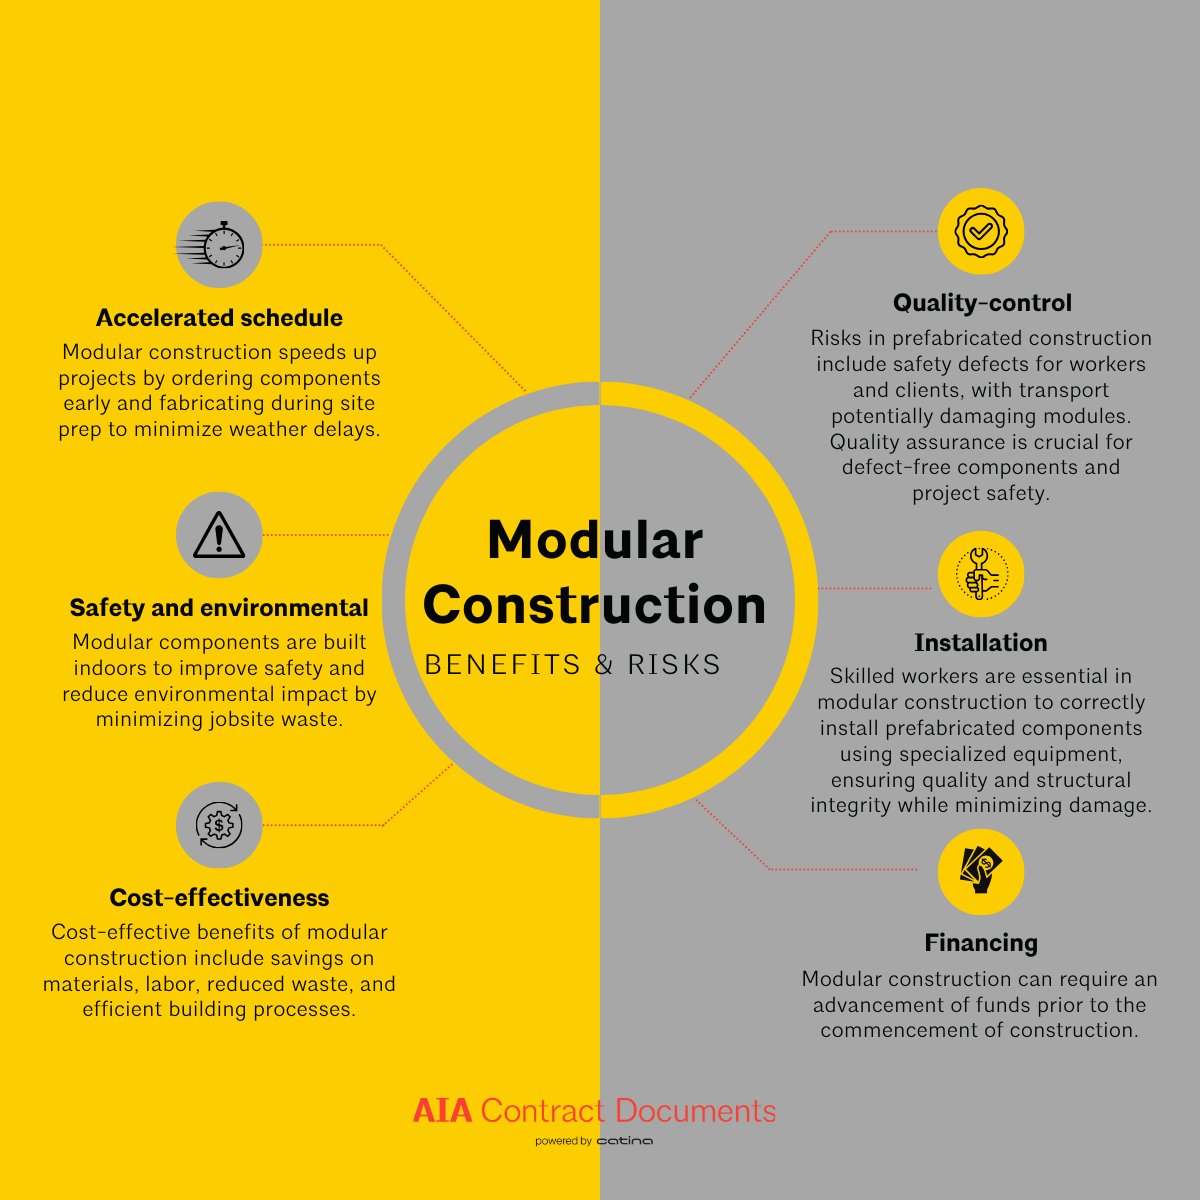 Discover the benefits and risks of modular construction. 🏗️ Dig in here: bit.ly/3PbXGFE #ModularConstruction #AIAContracts